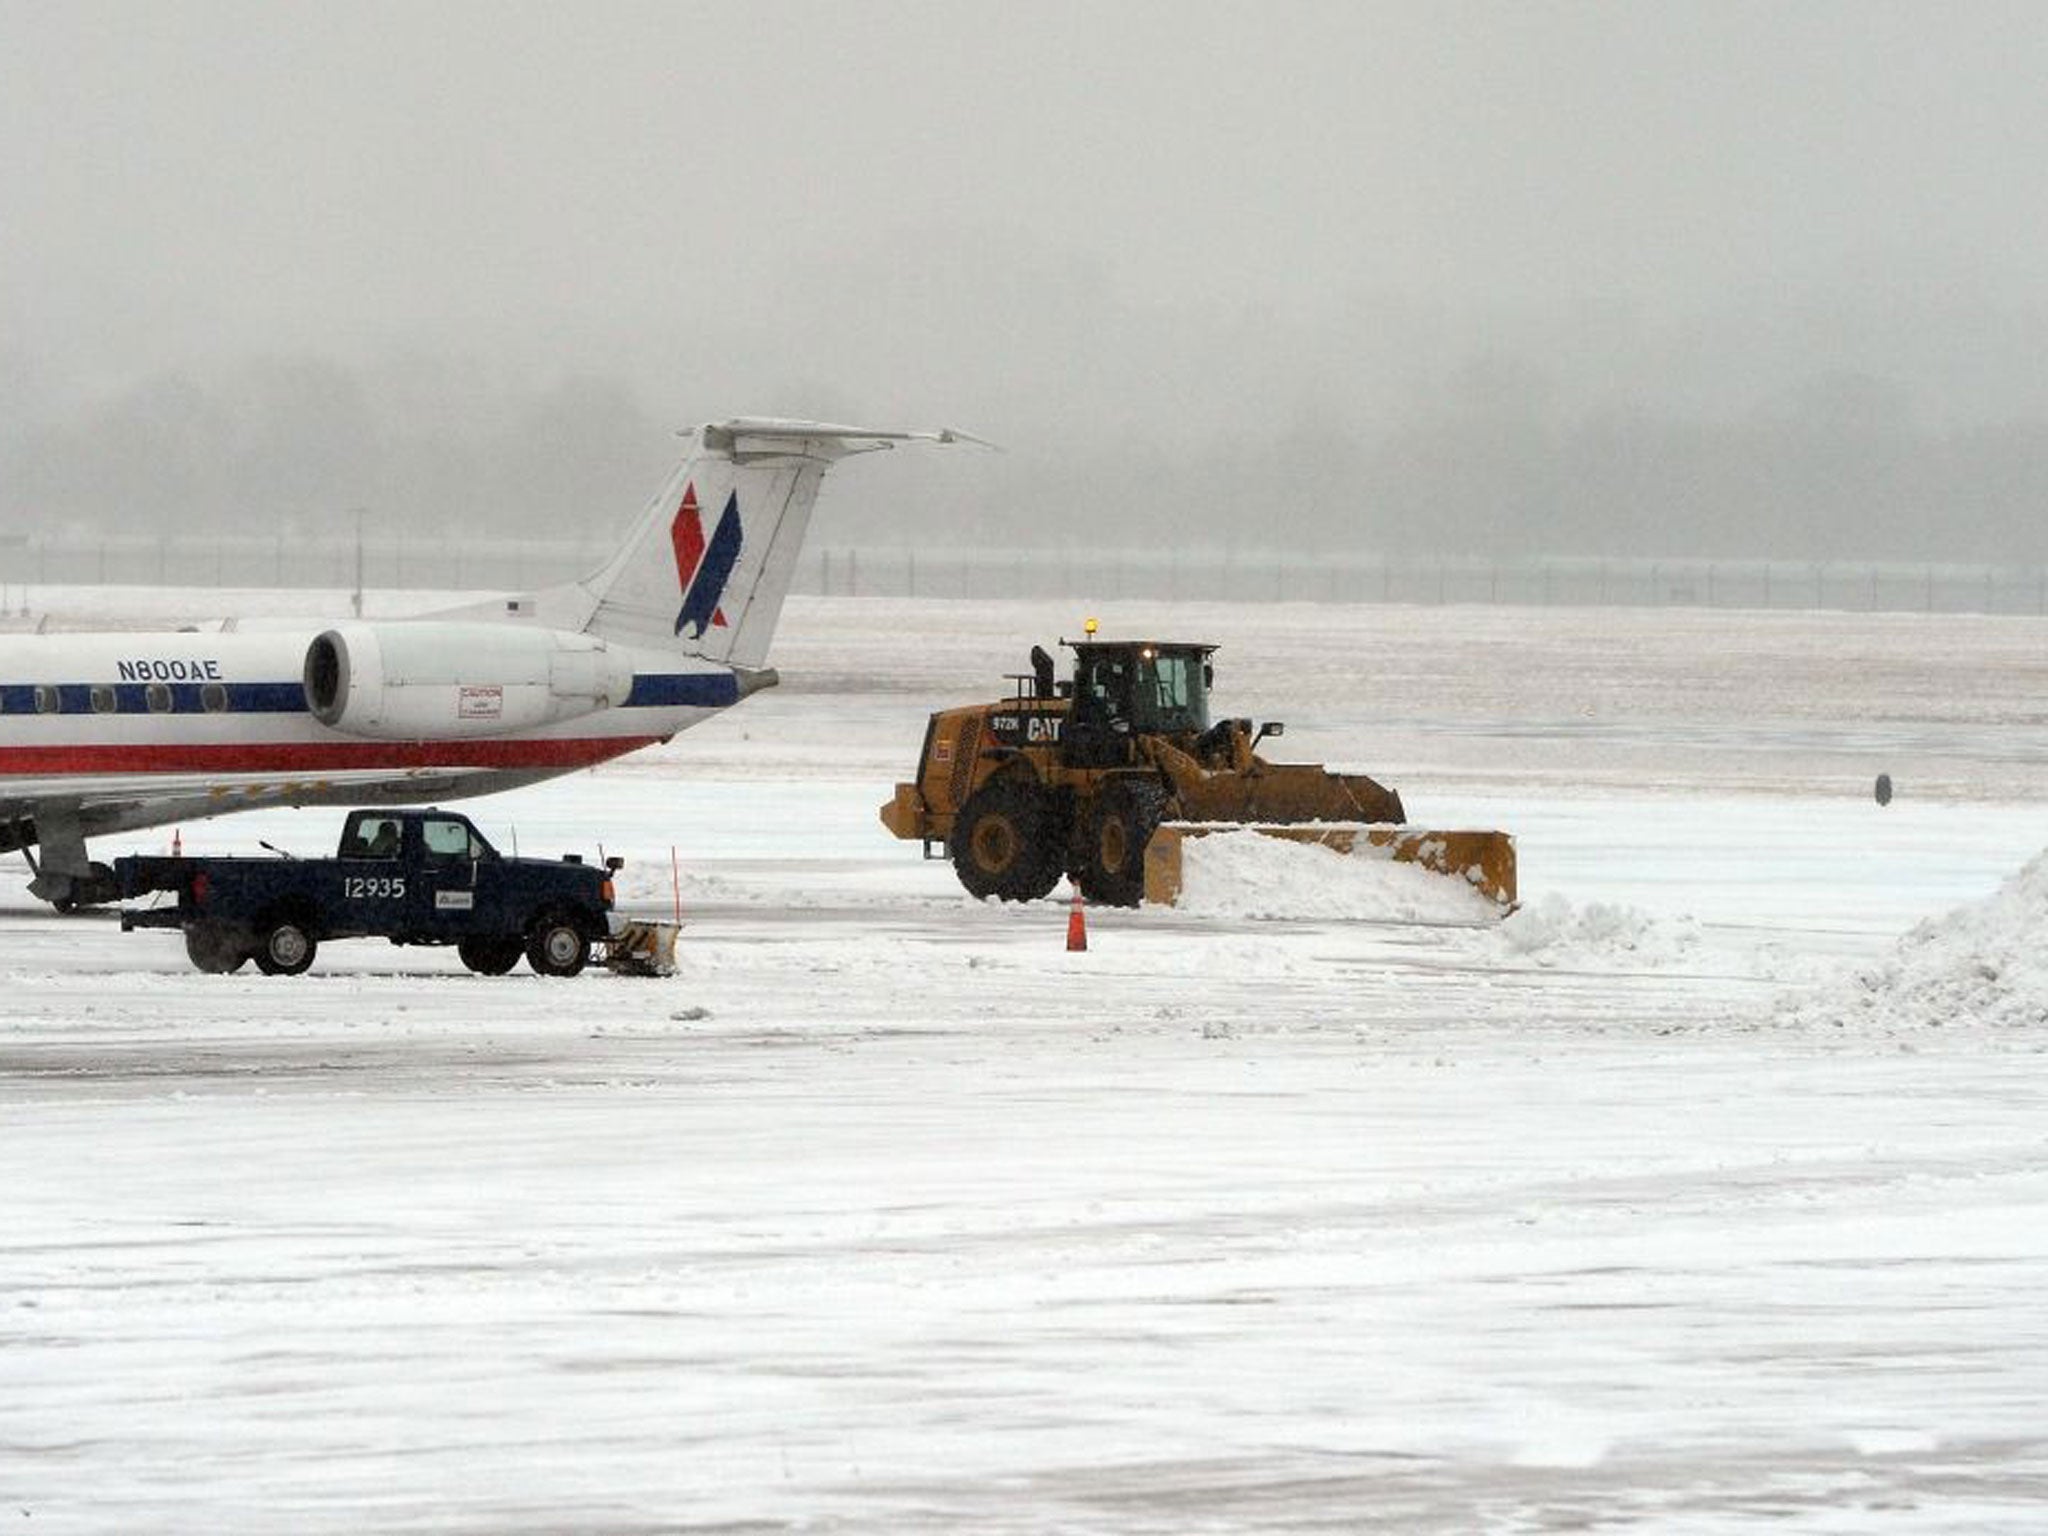 Workers use snowplows to clean a tarmac at the Reagan National Airport during a snow storm in Washington, DC